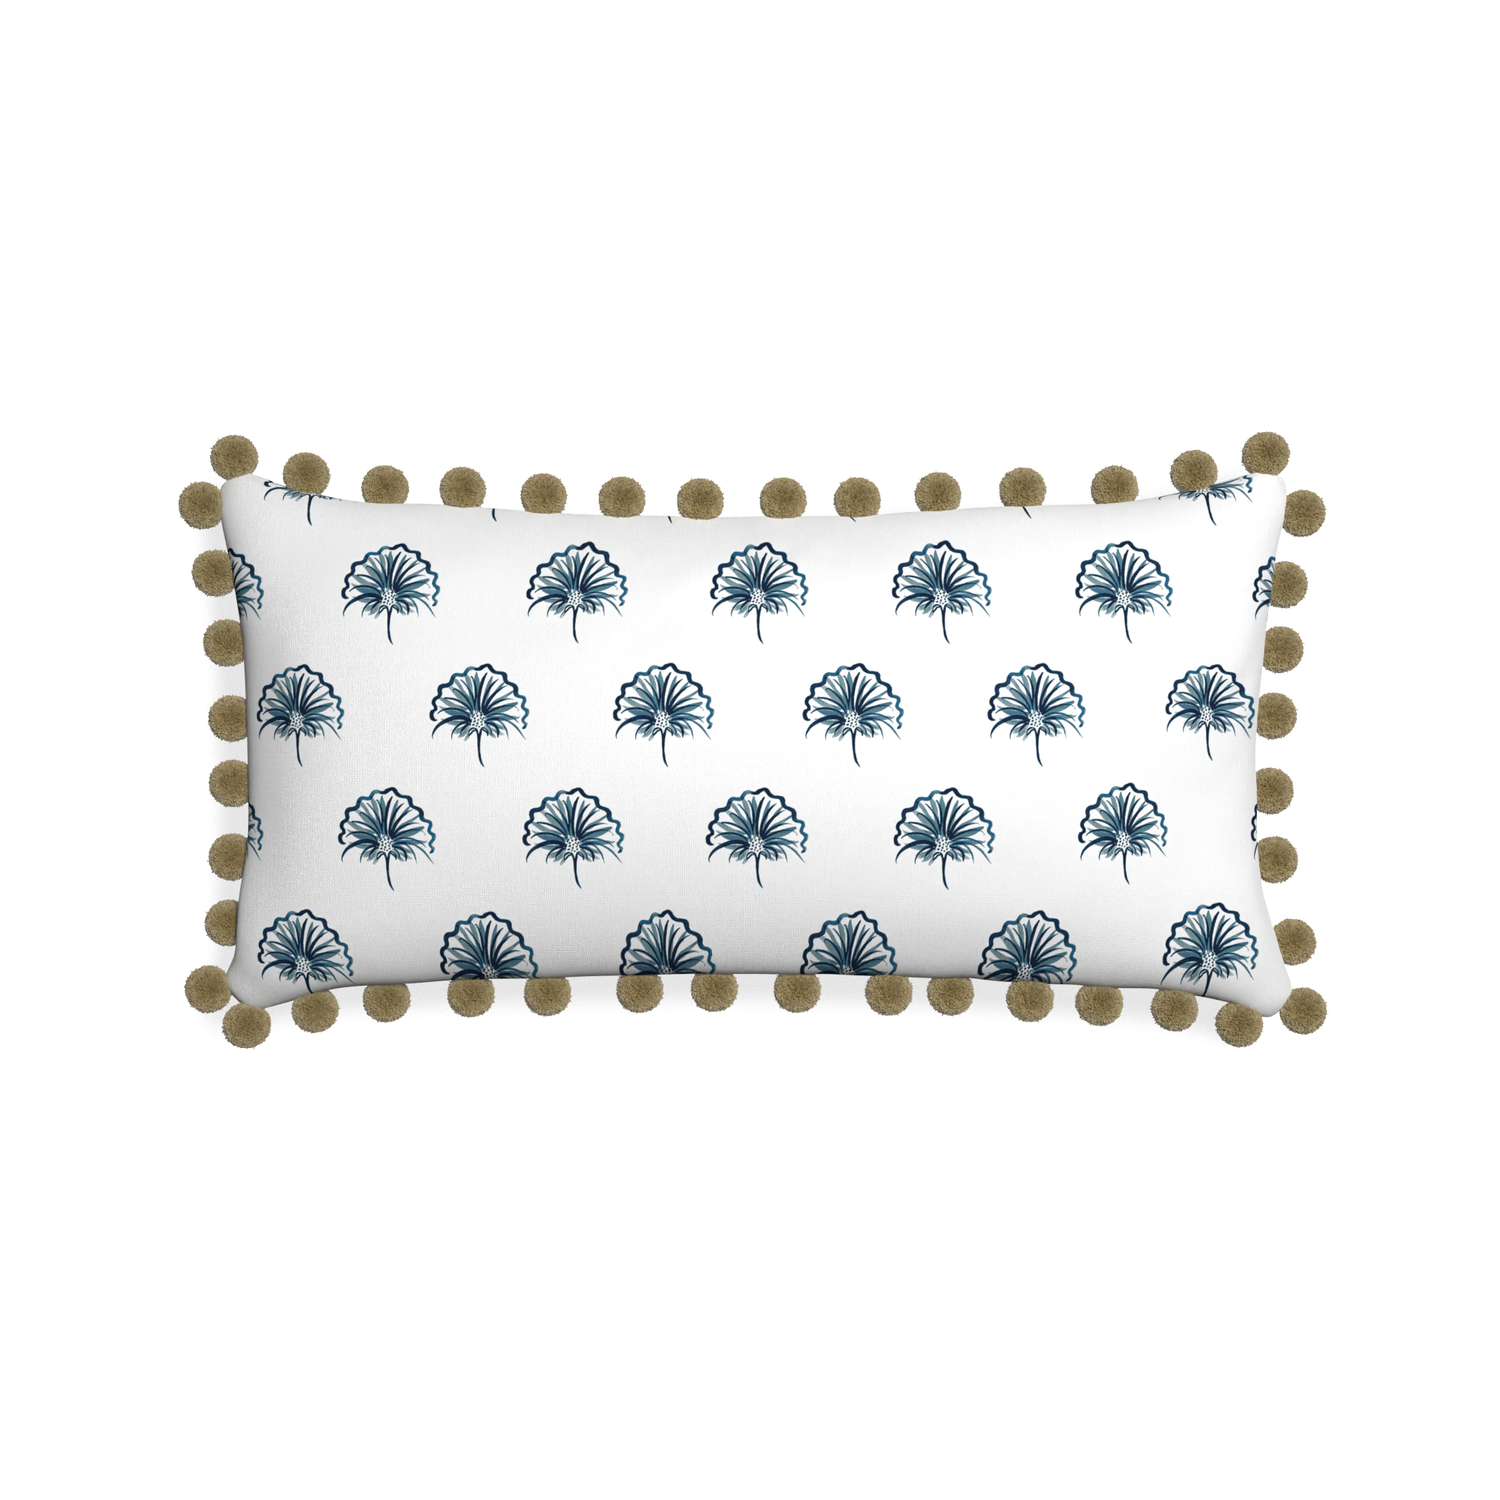 Midi-lumbar penelope midnight custom floral navypillow with olive pom pom on white background